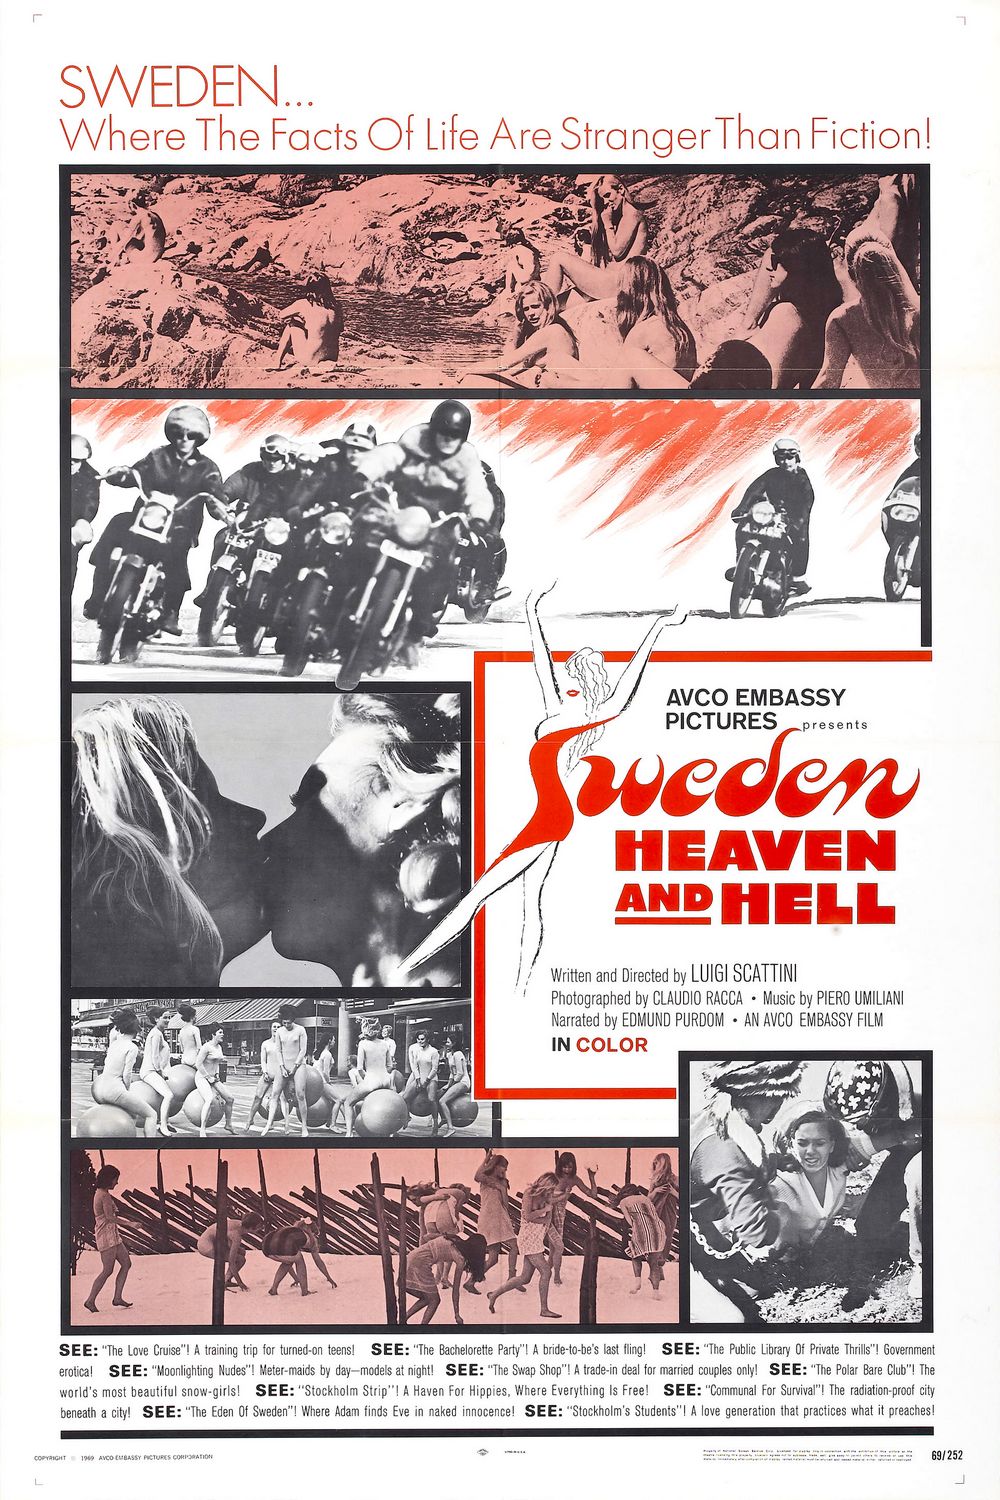 Extra Large Movie Poster Image for Sweden Heaven and Hell 